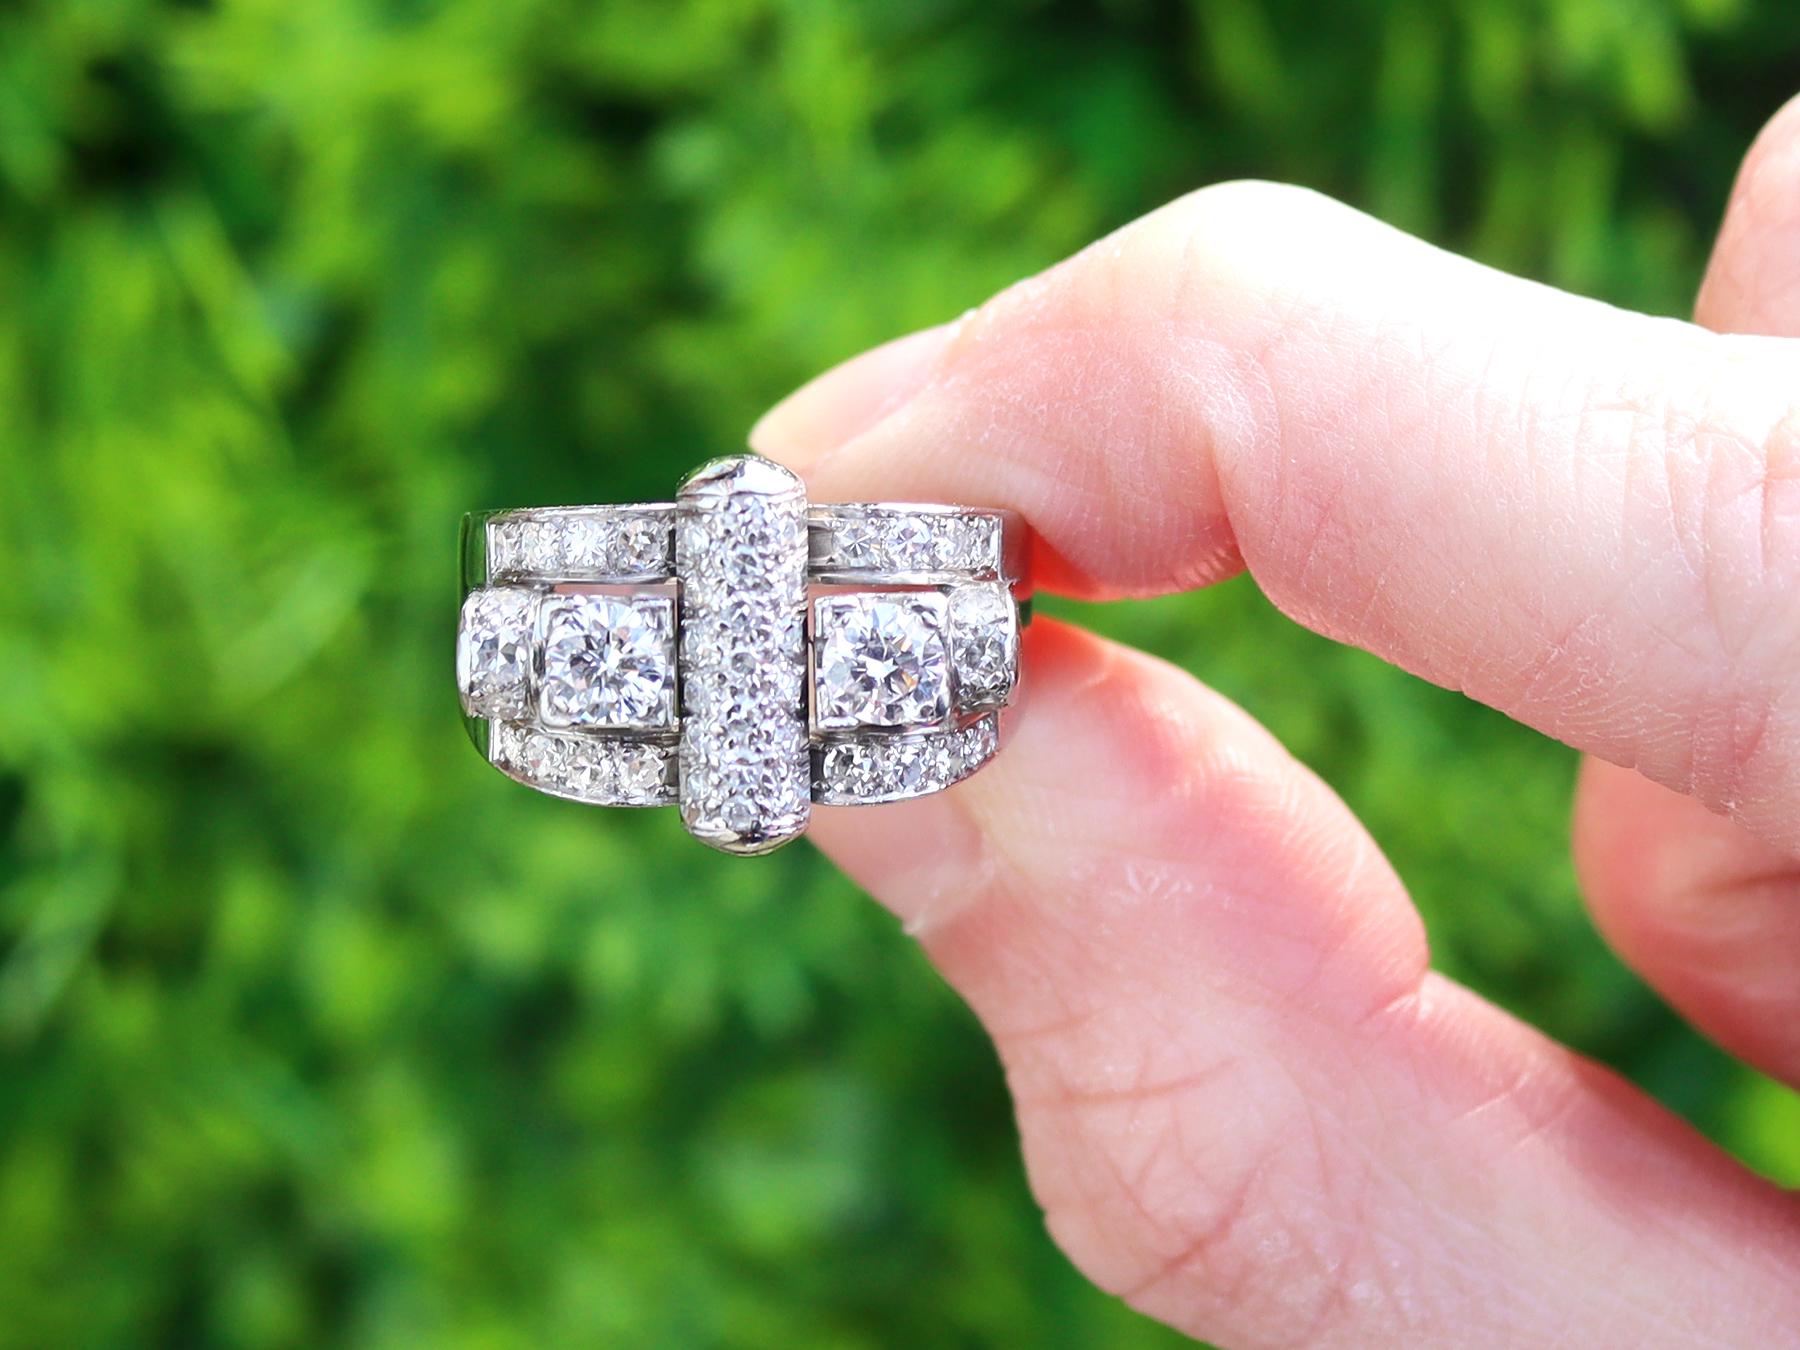 A stunning, fine and impressive antique Art Deco 1.01 carat diamond and platinum dress ring; part of our diverse diamond jewelry and estate jewelry collections

This stunning, fine and impressive Art Deco ring has been crafted in platinum.

The